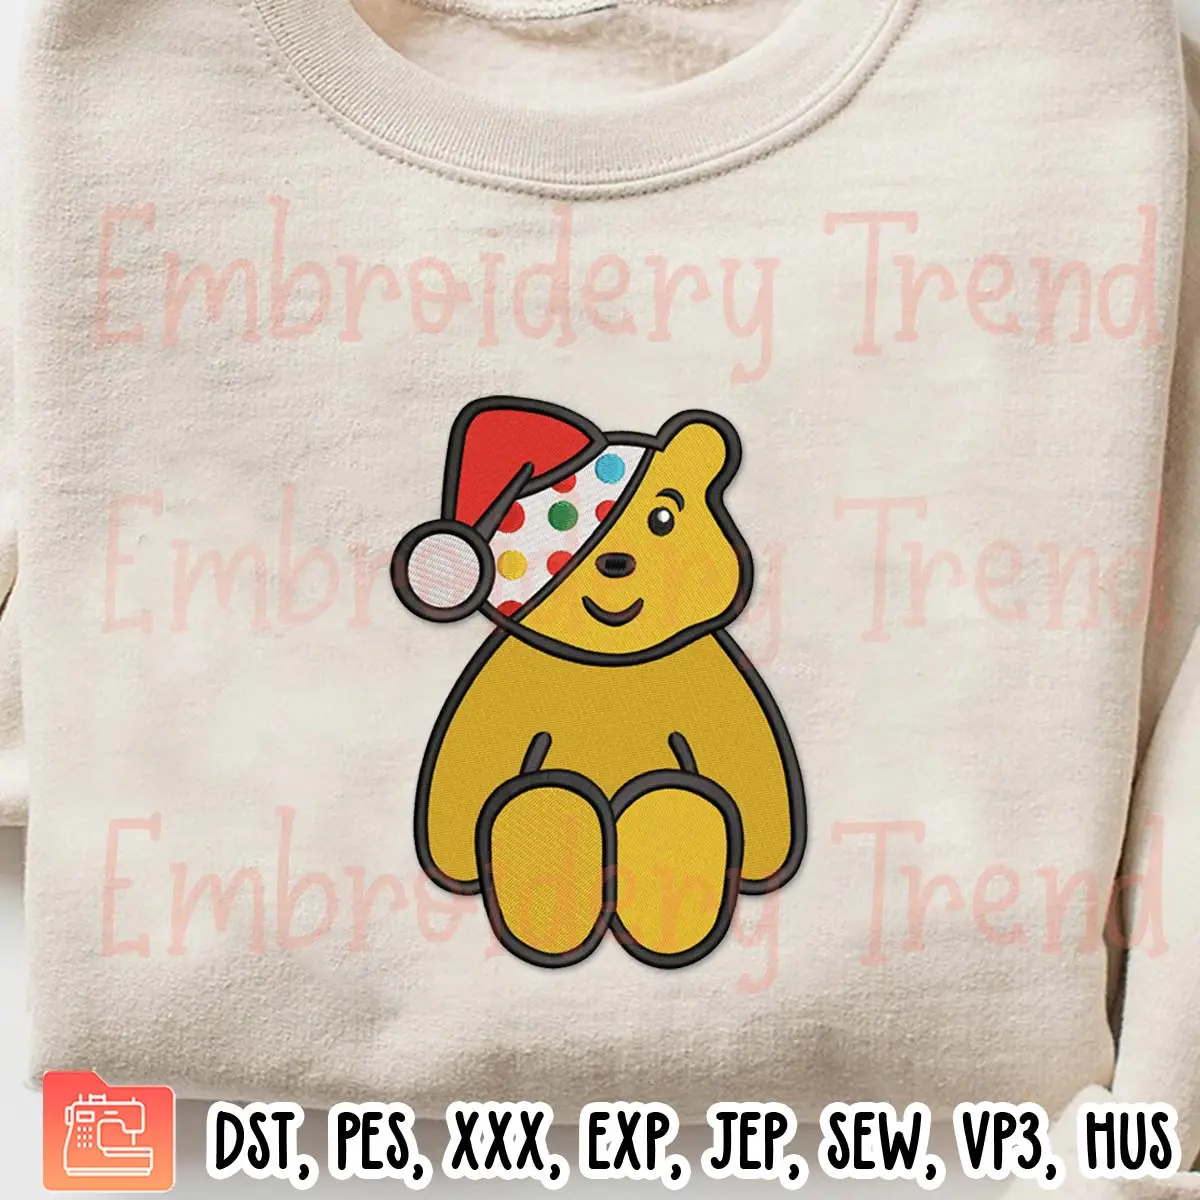 Pudsey Bear Christmas Embroidery Design, Children In Need Embroidery Digitizing File